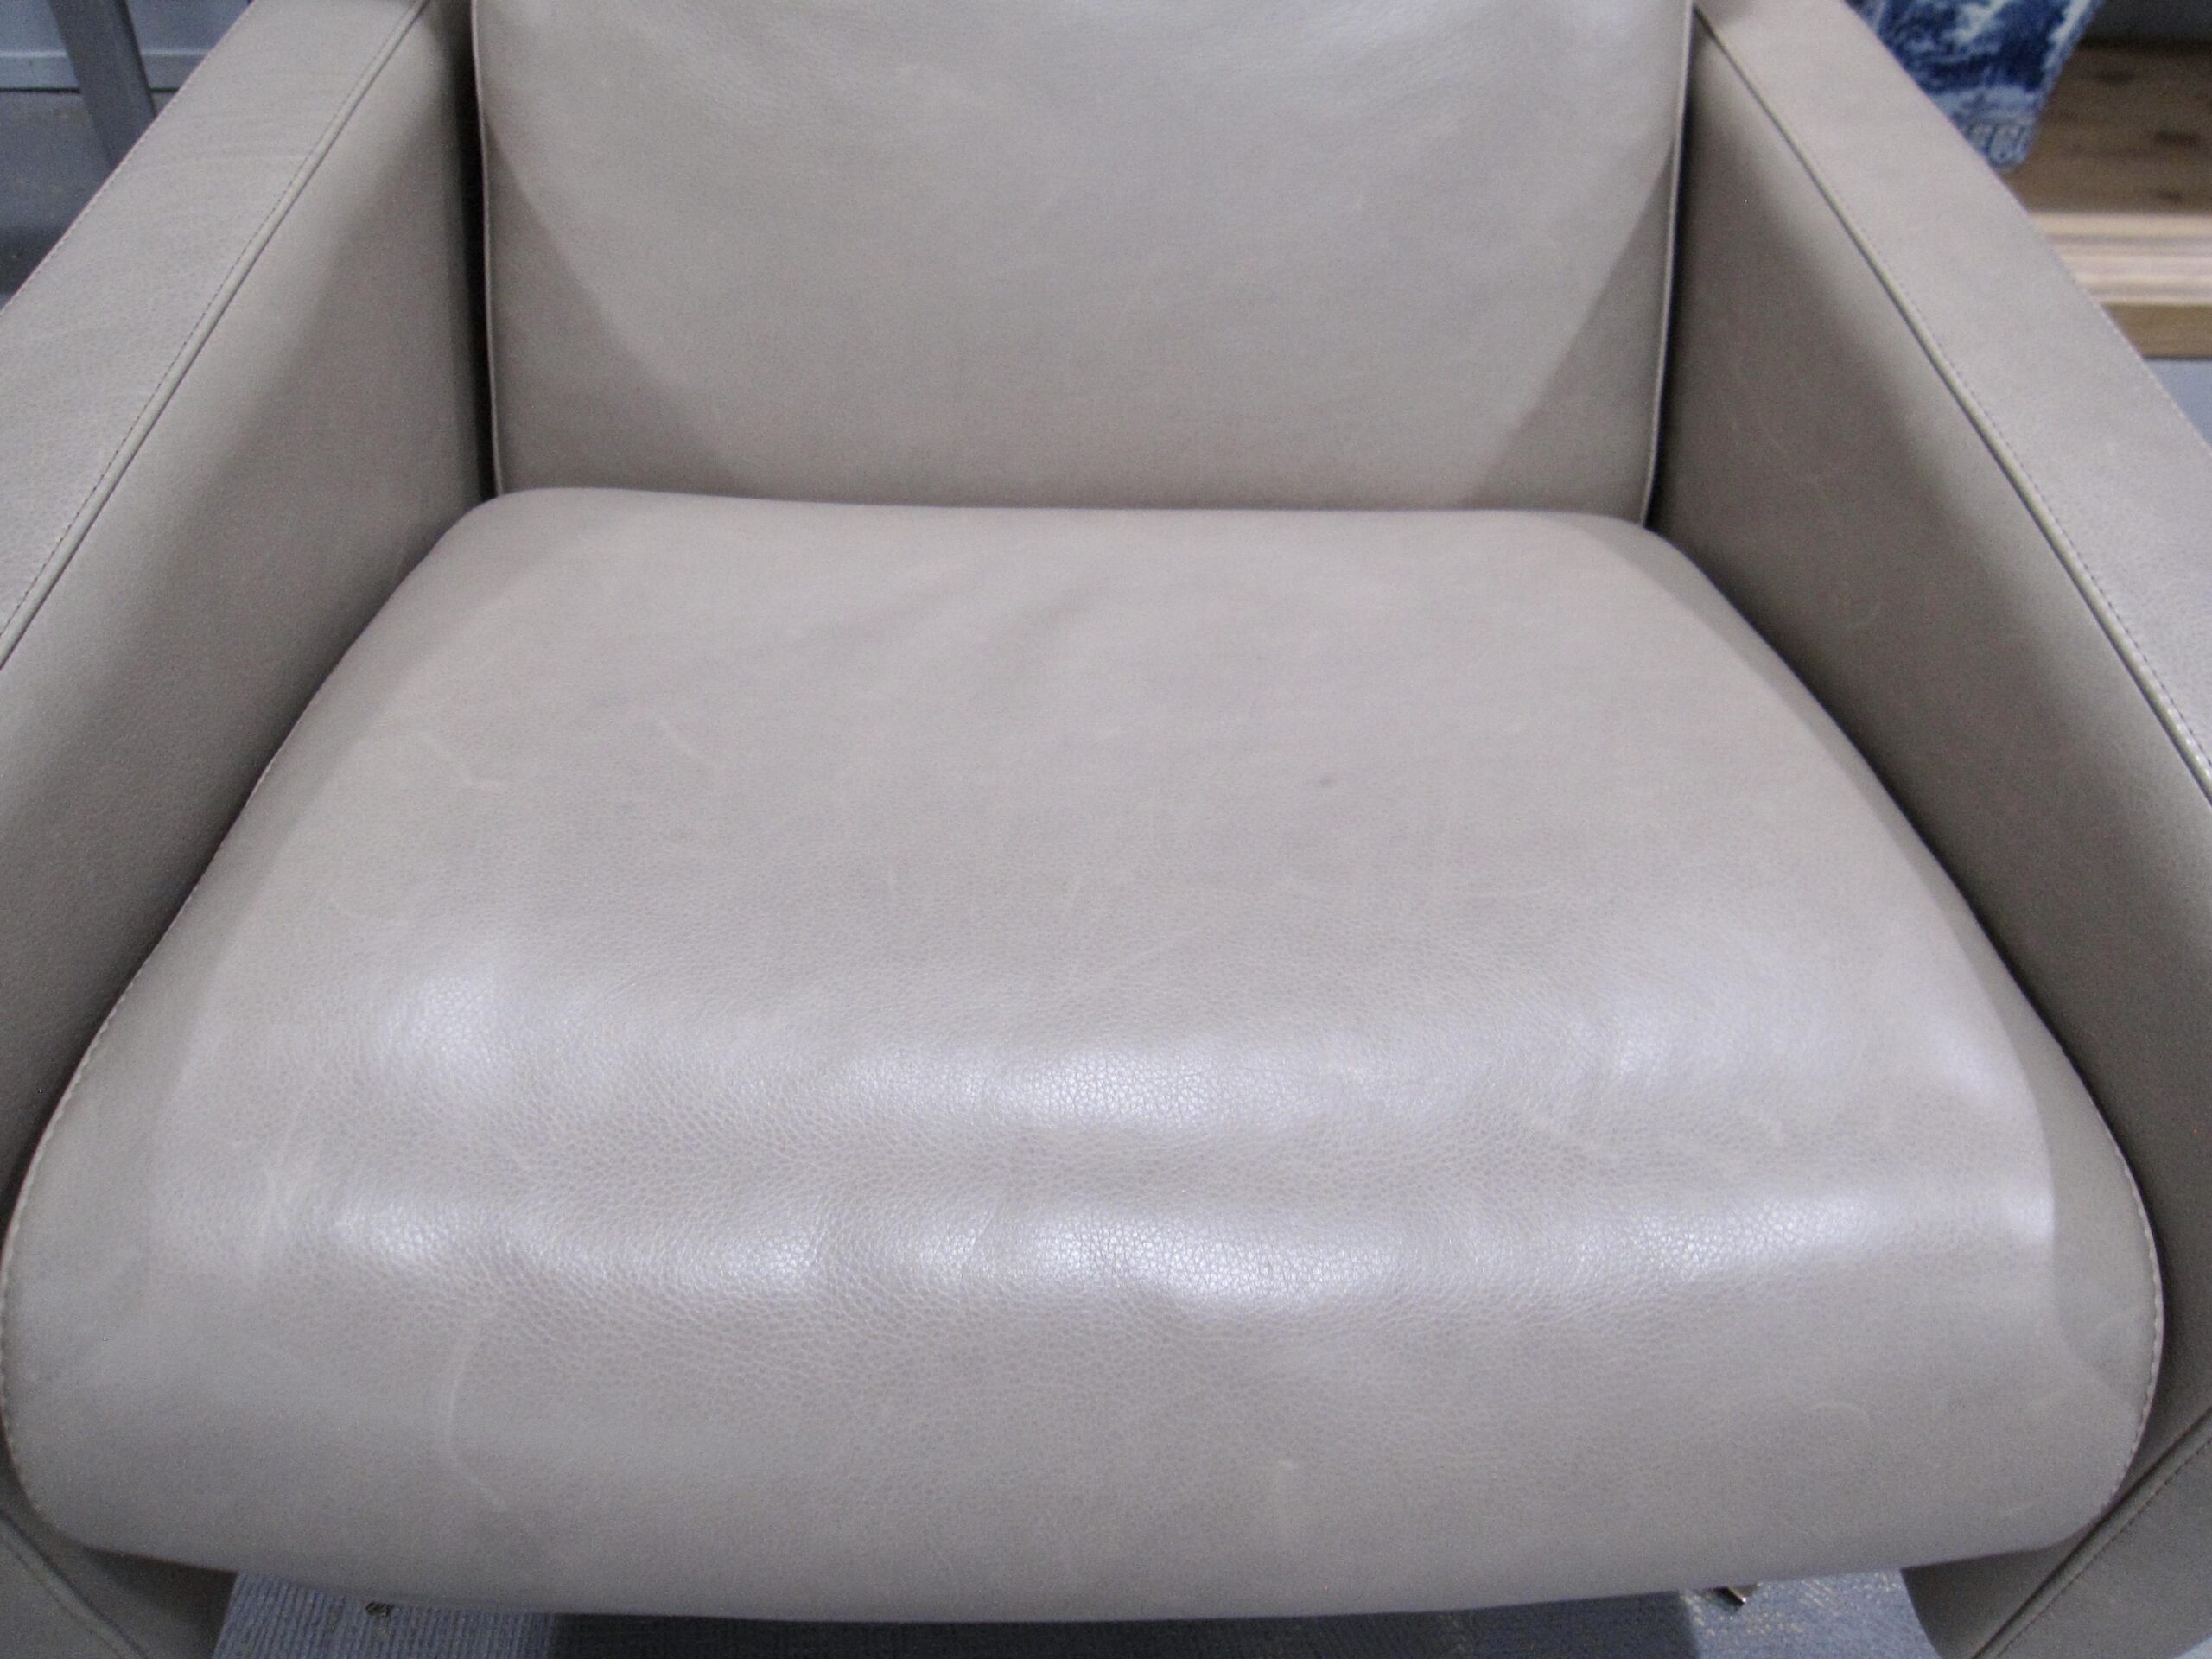 American Leather Cloud Comfort Air Chair